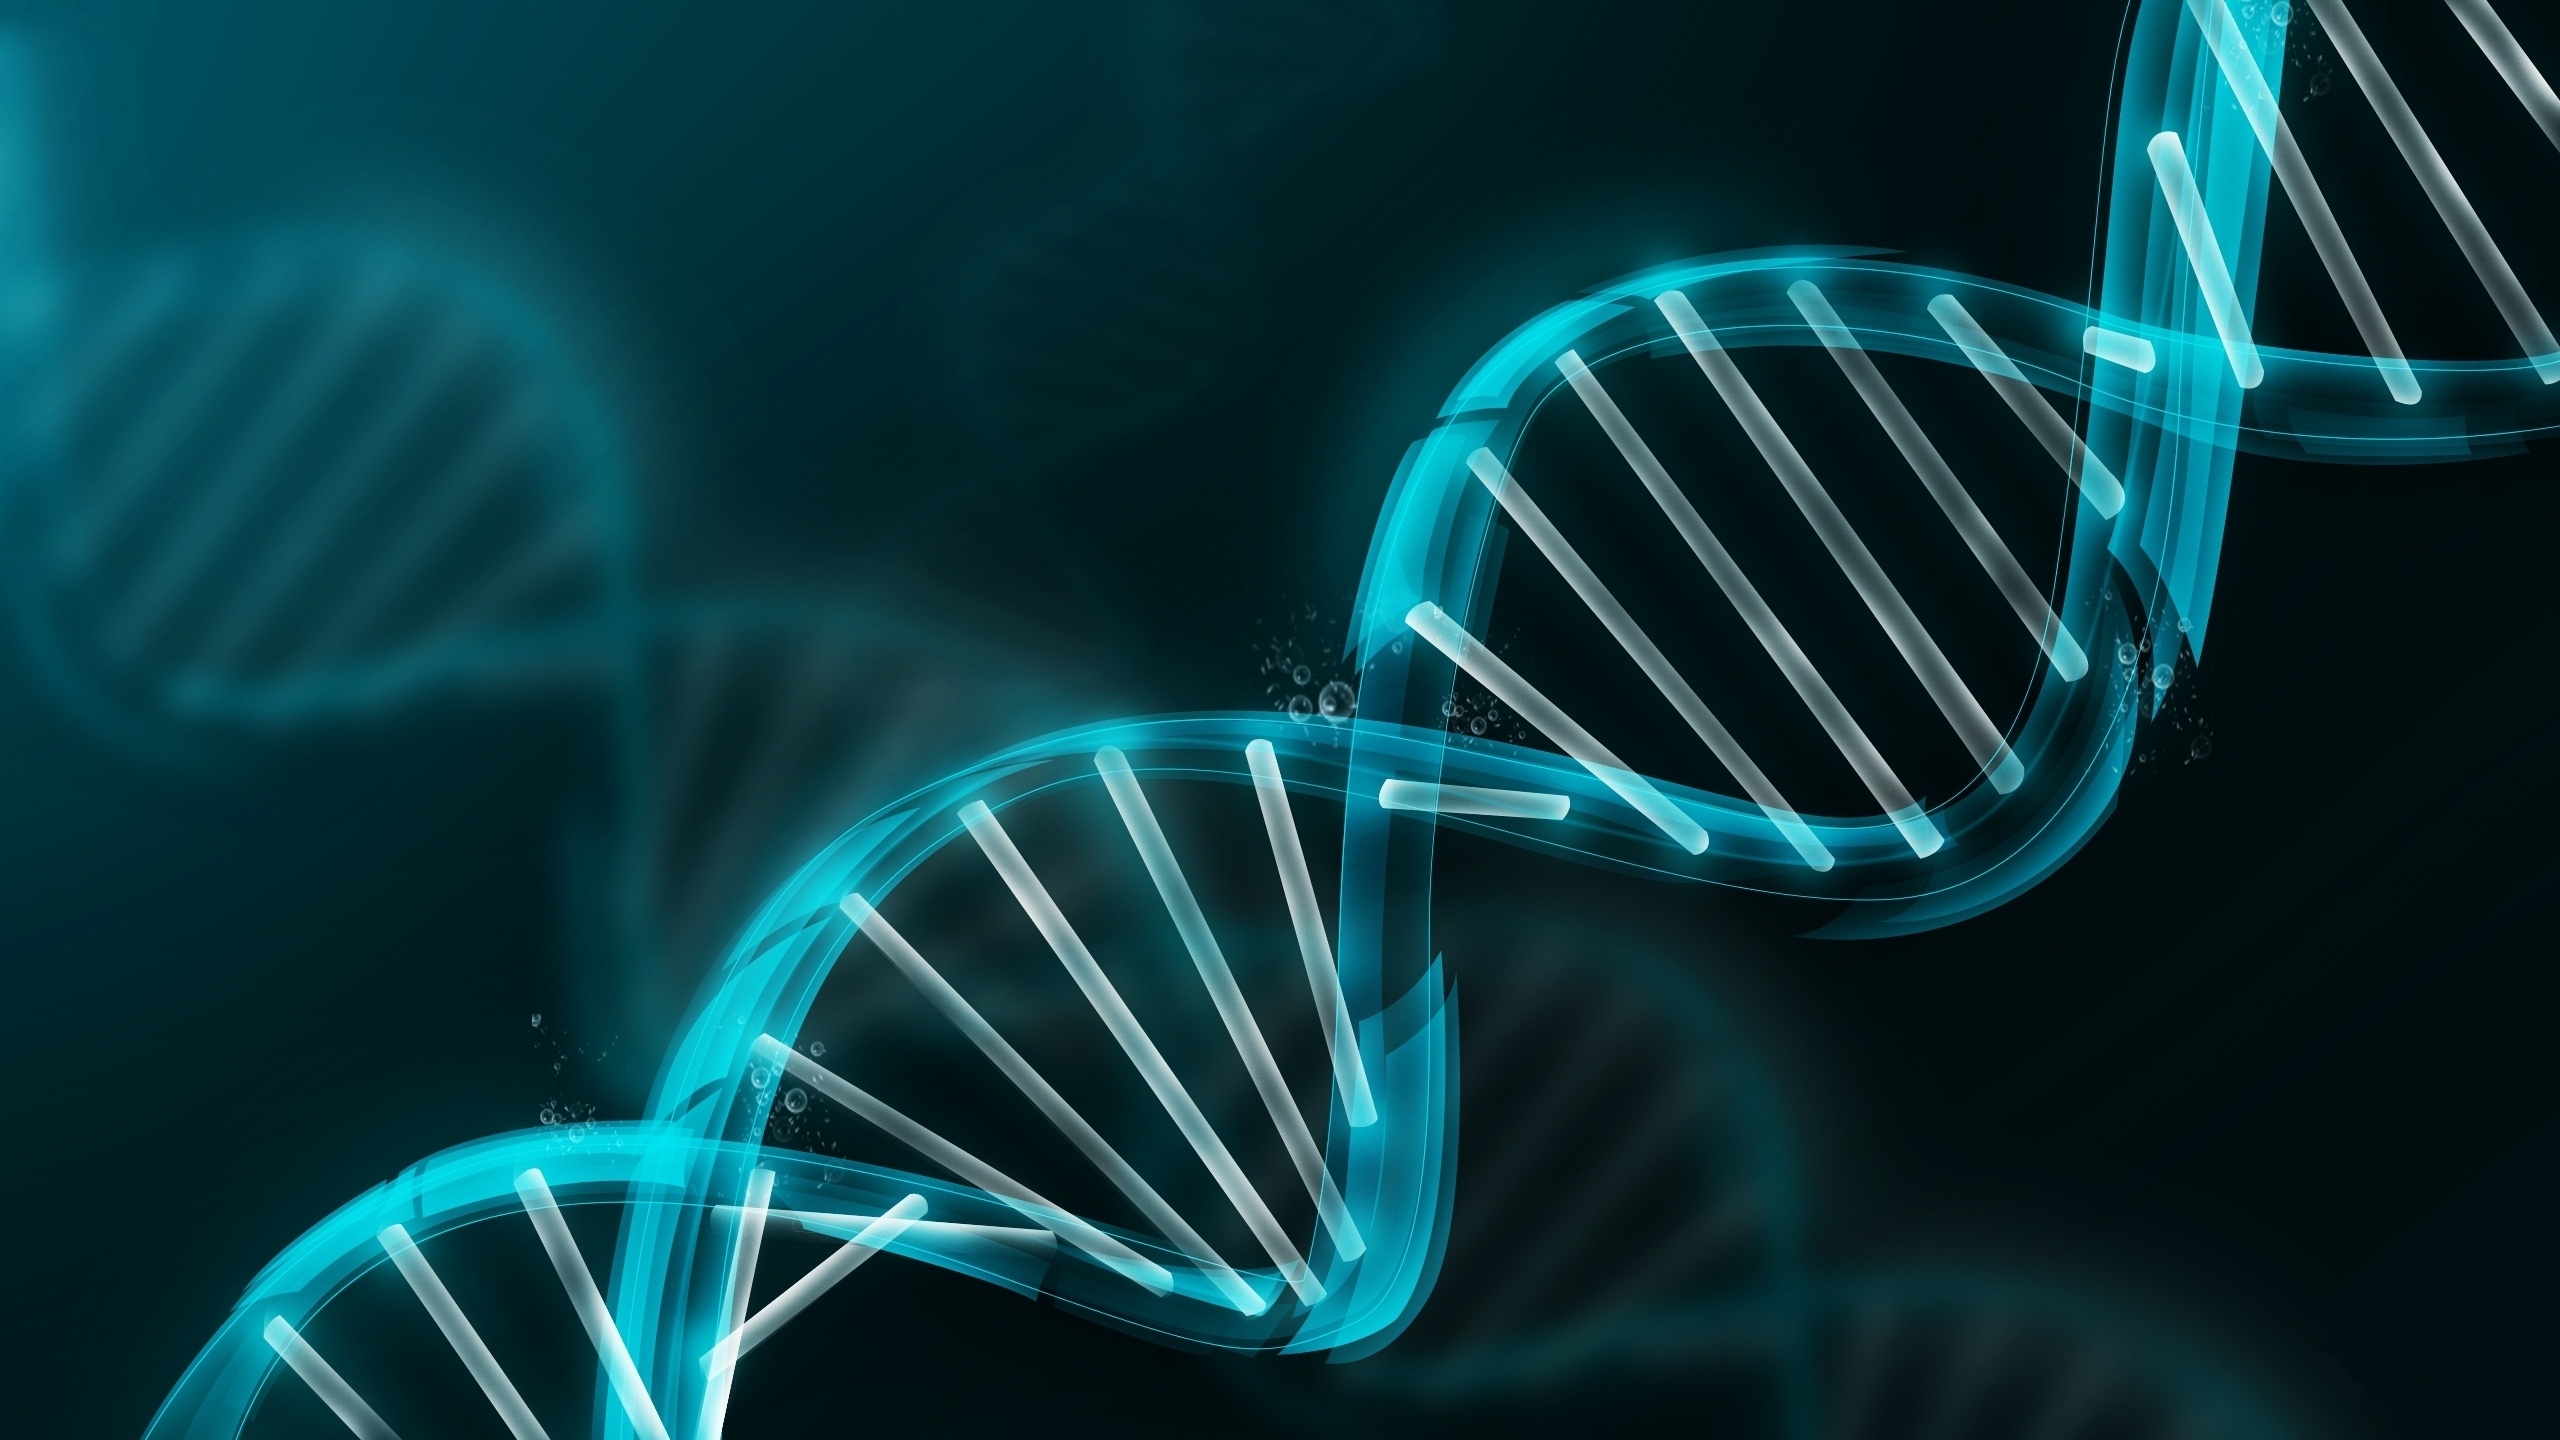 10 Top Dna Wallpaper High Resolution FULL HD 1080p For PC Background